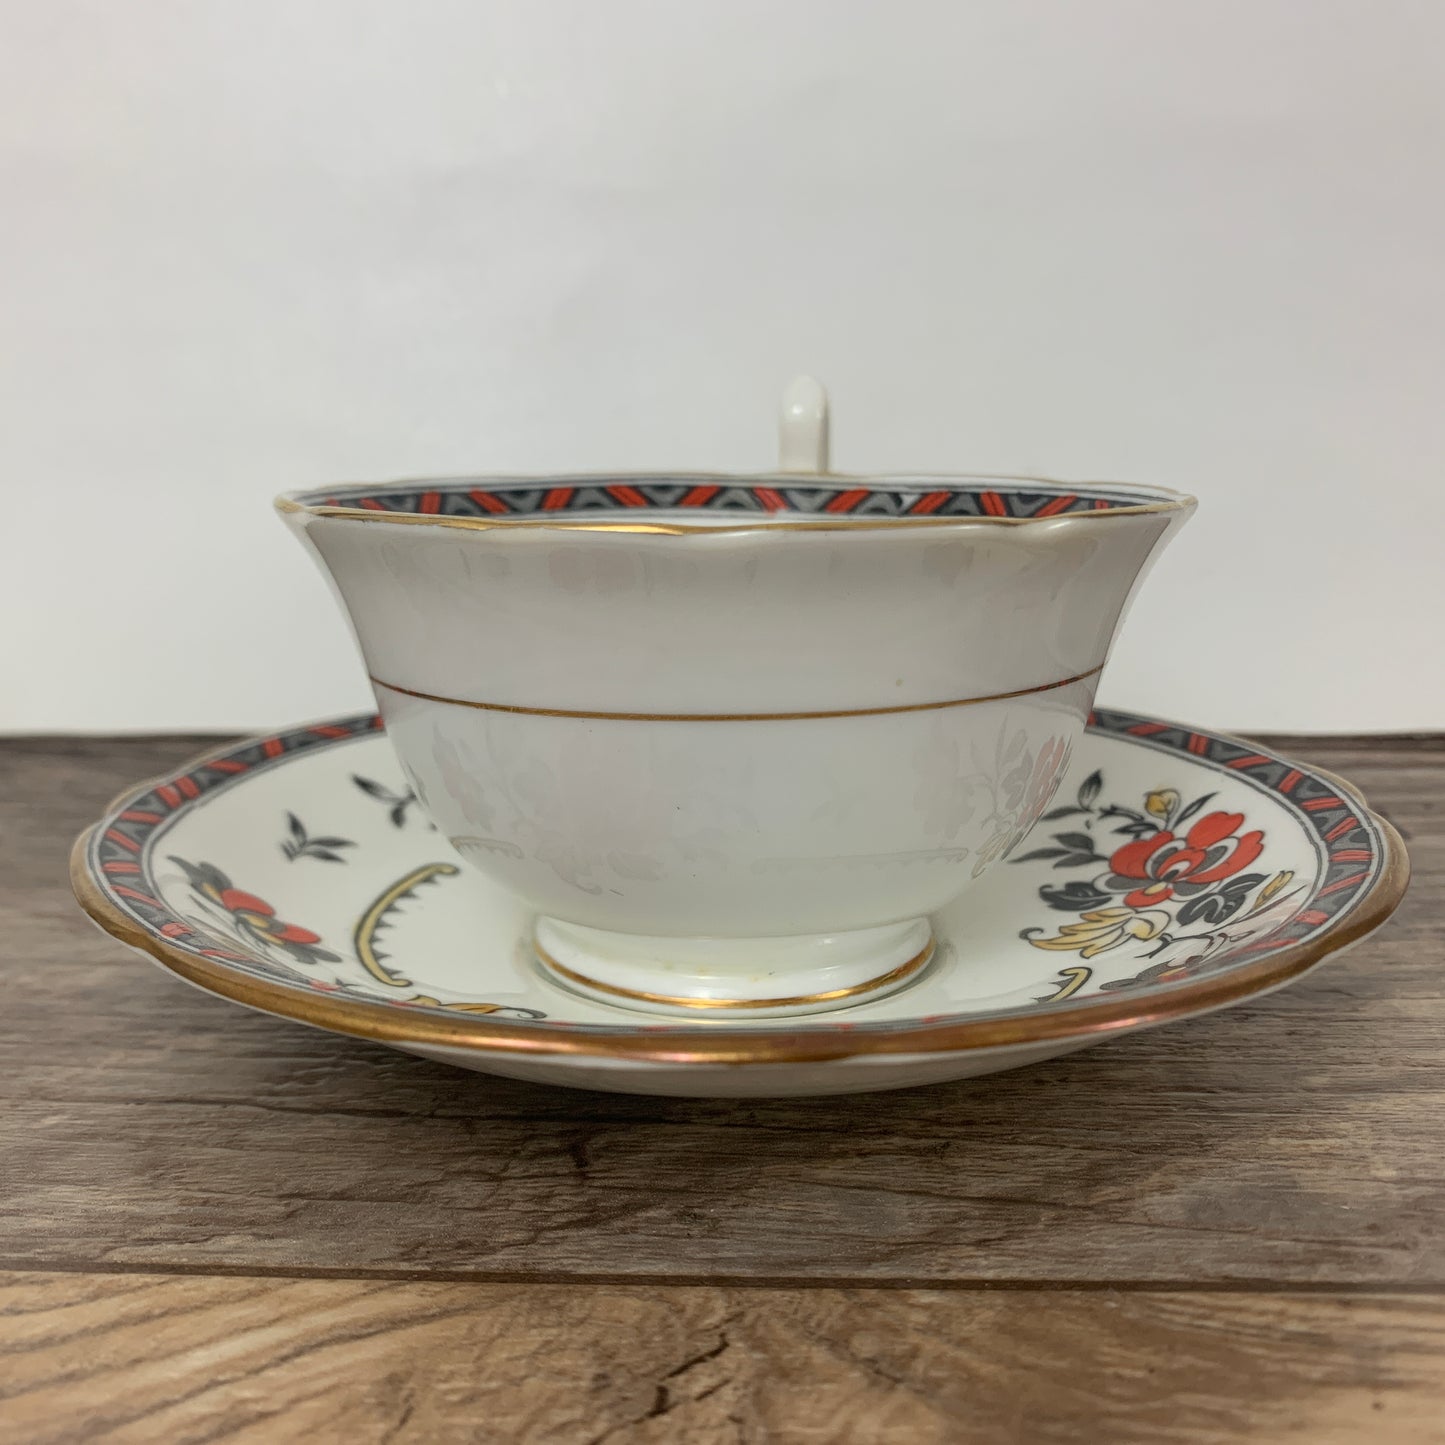 Aynsley Vintage Teacup and Saucer with Black and Orange Pattern